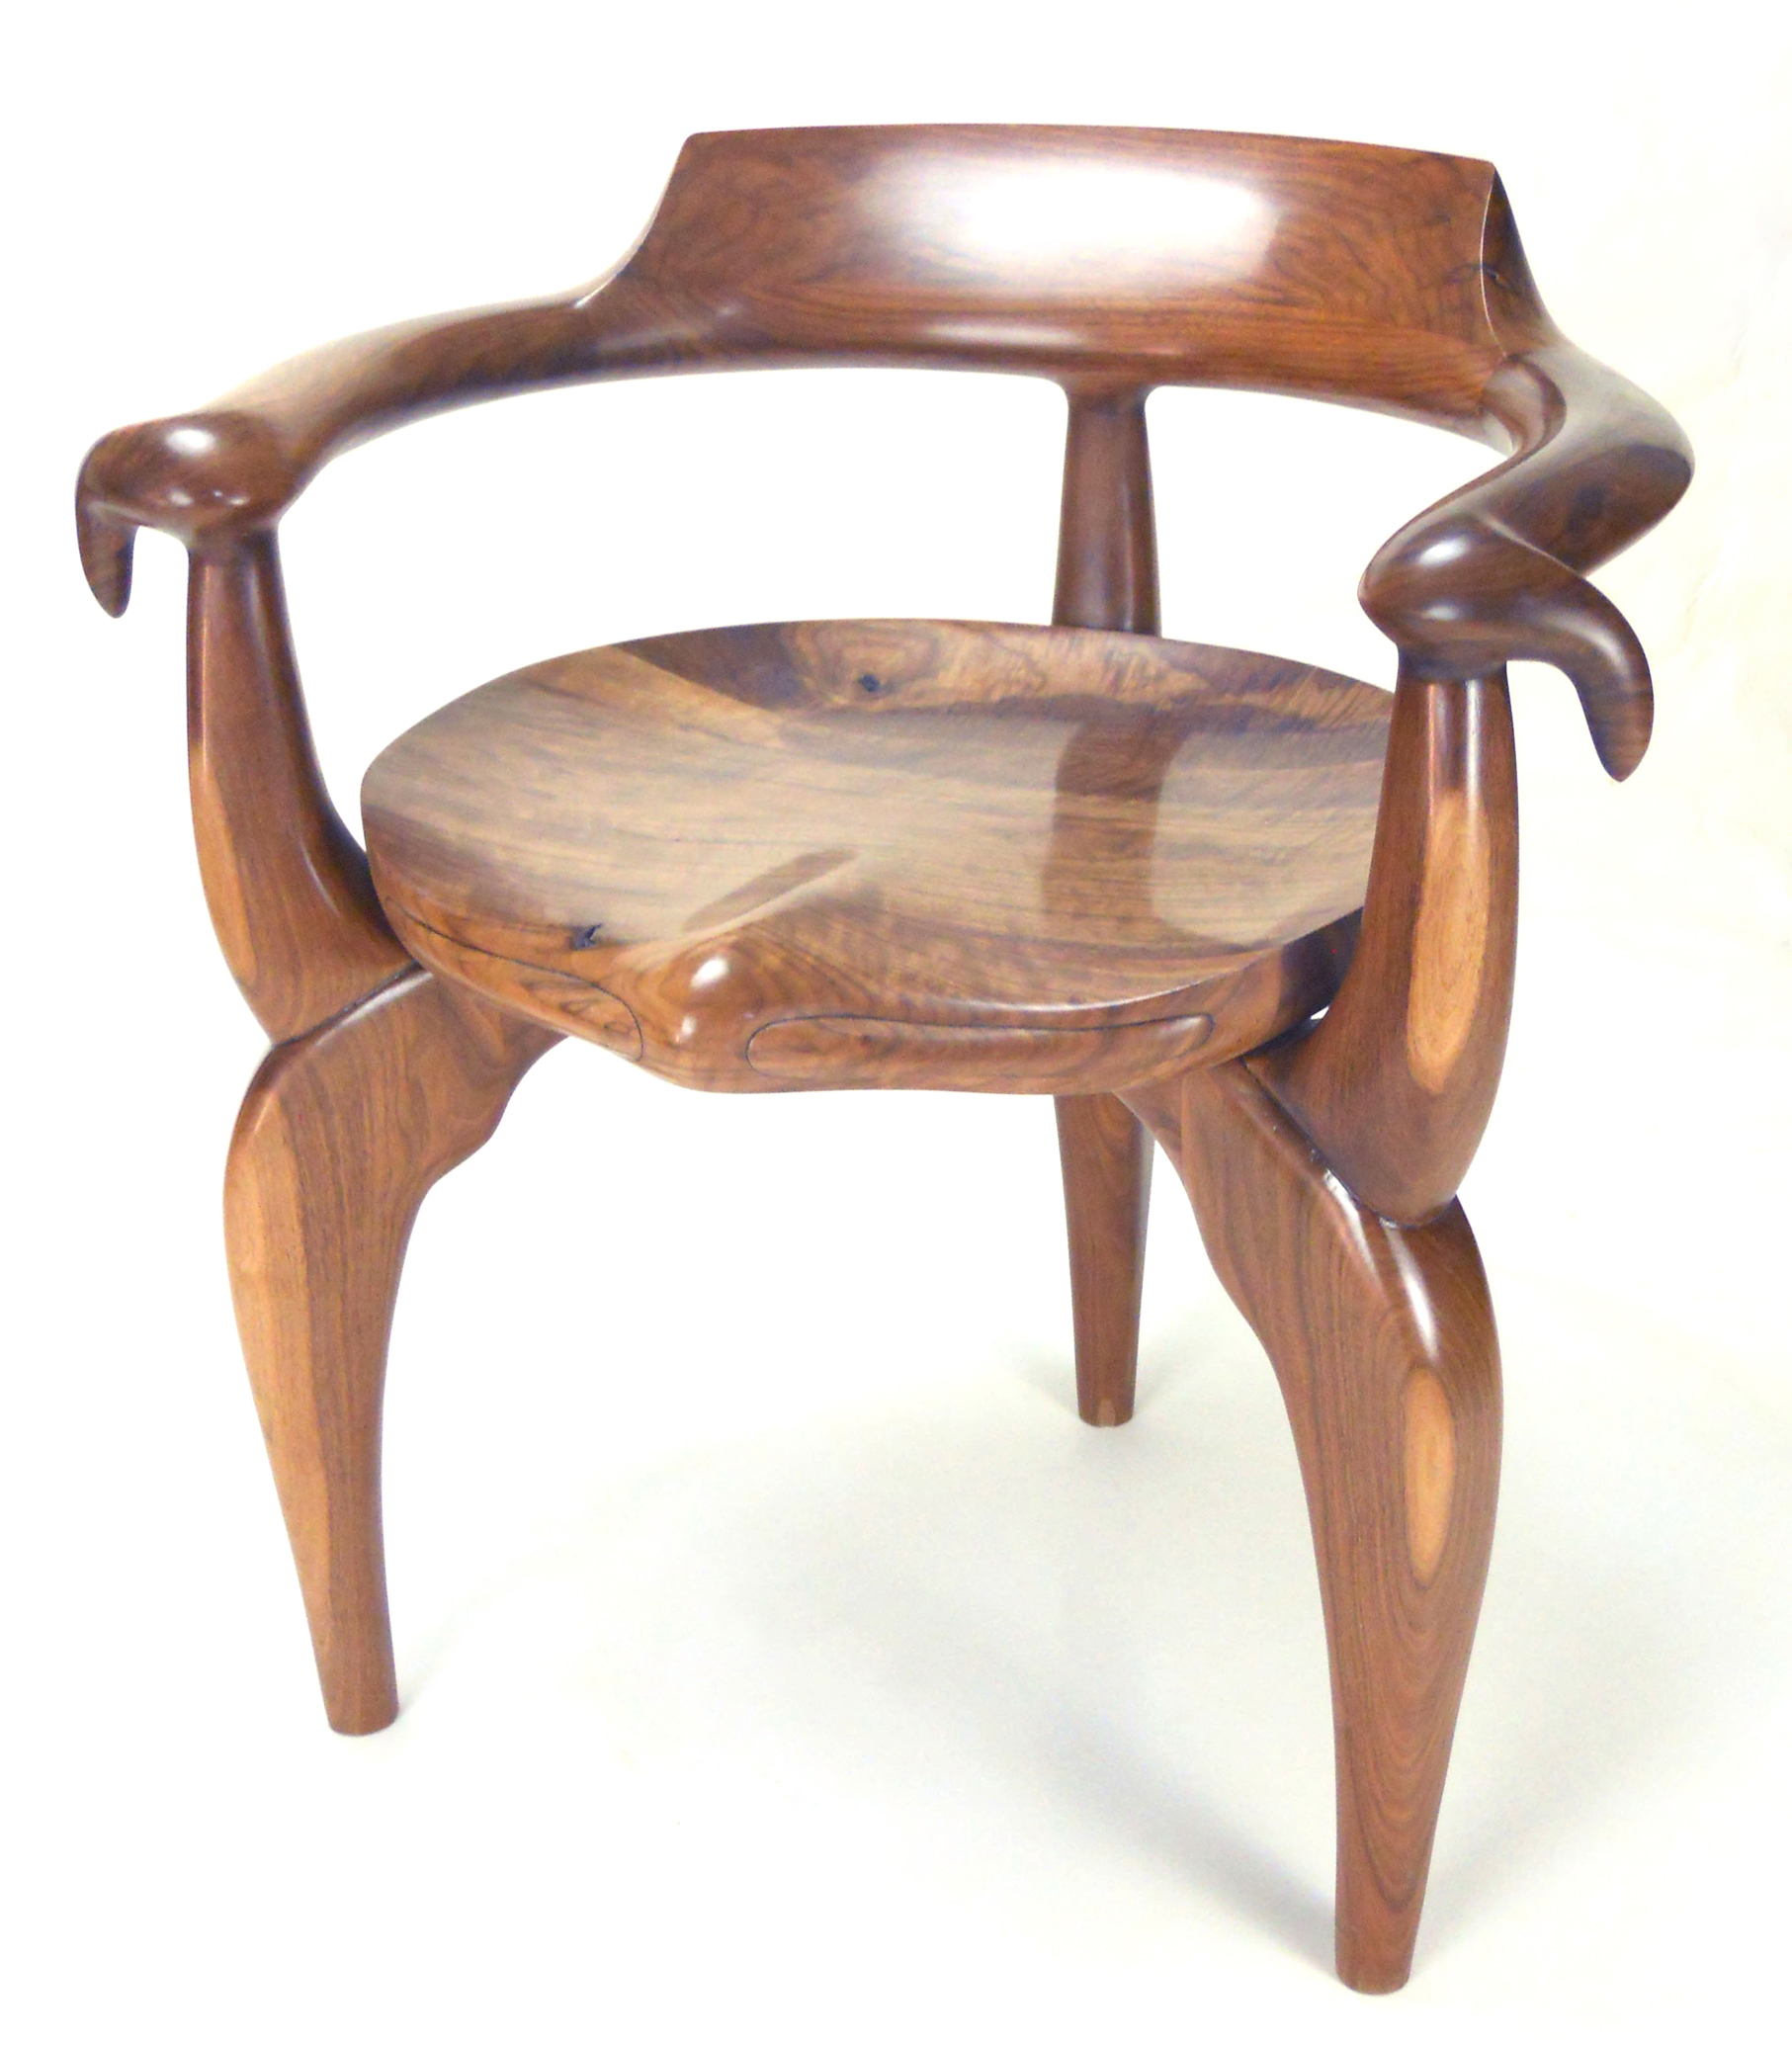 Bespoke Global - Product Detail - Half Shell Chair